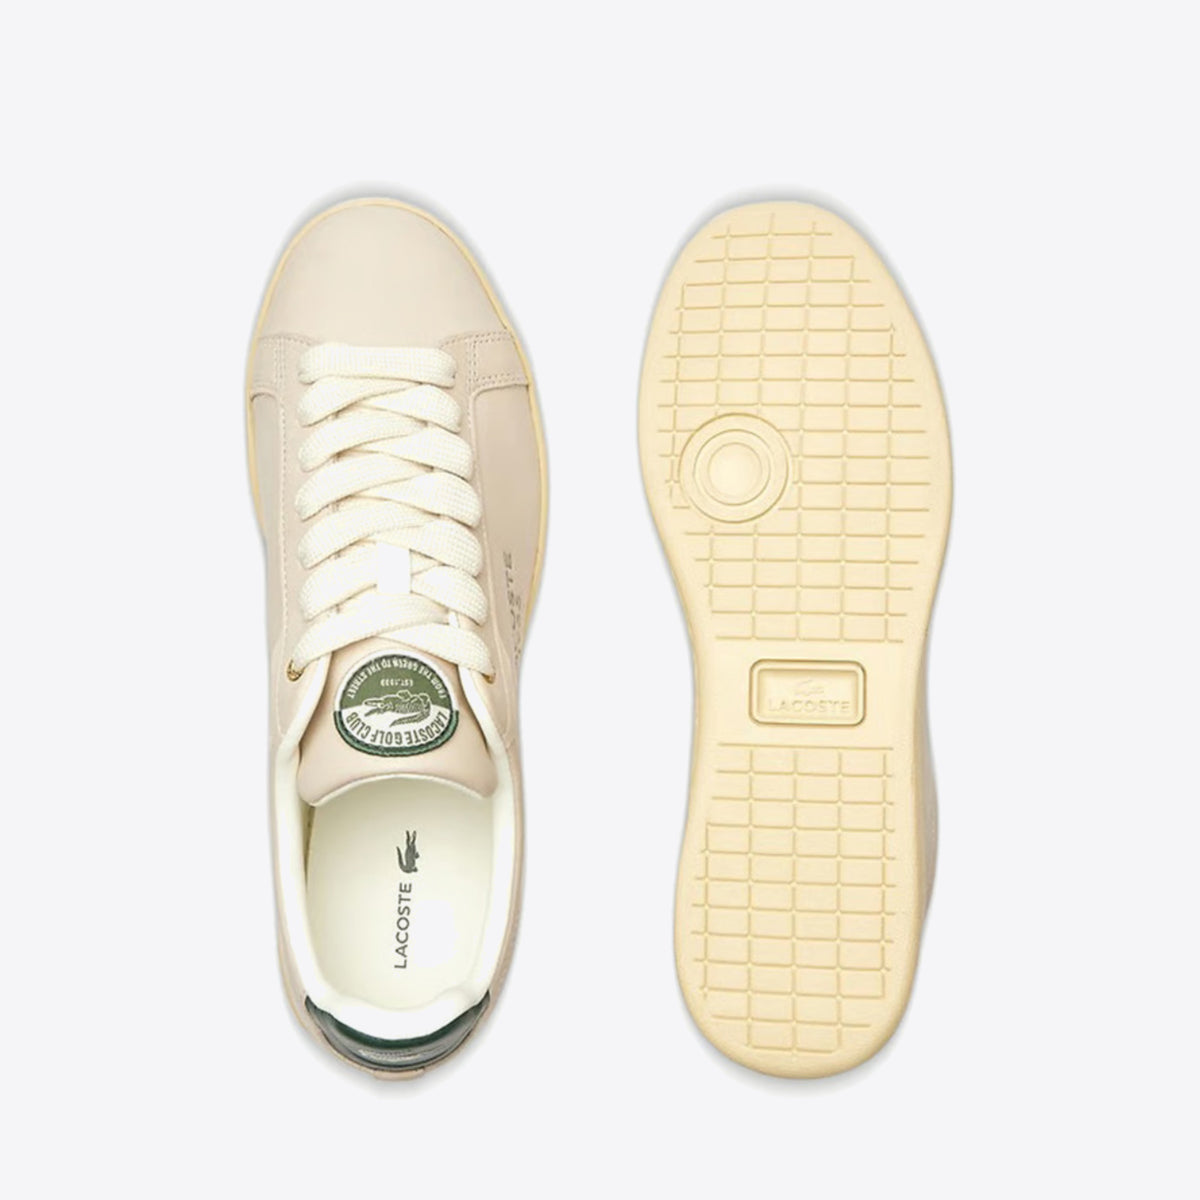 LACOSTE Carnaby Pro 2235 Off White/Green - Image 5